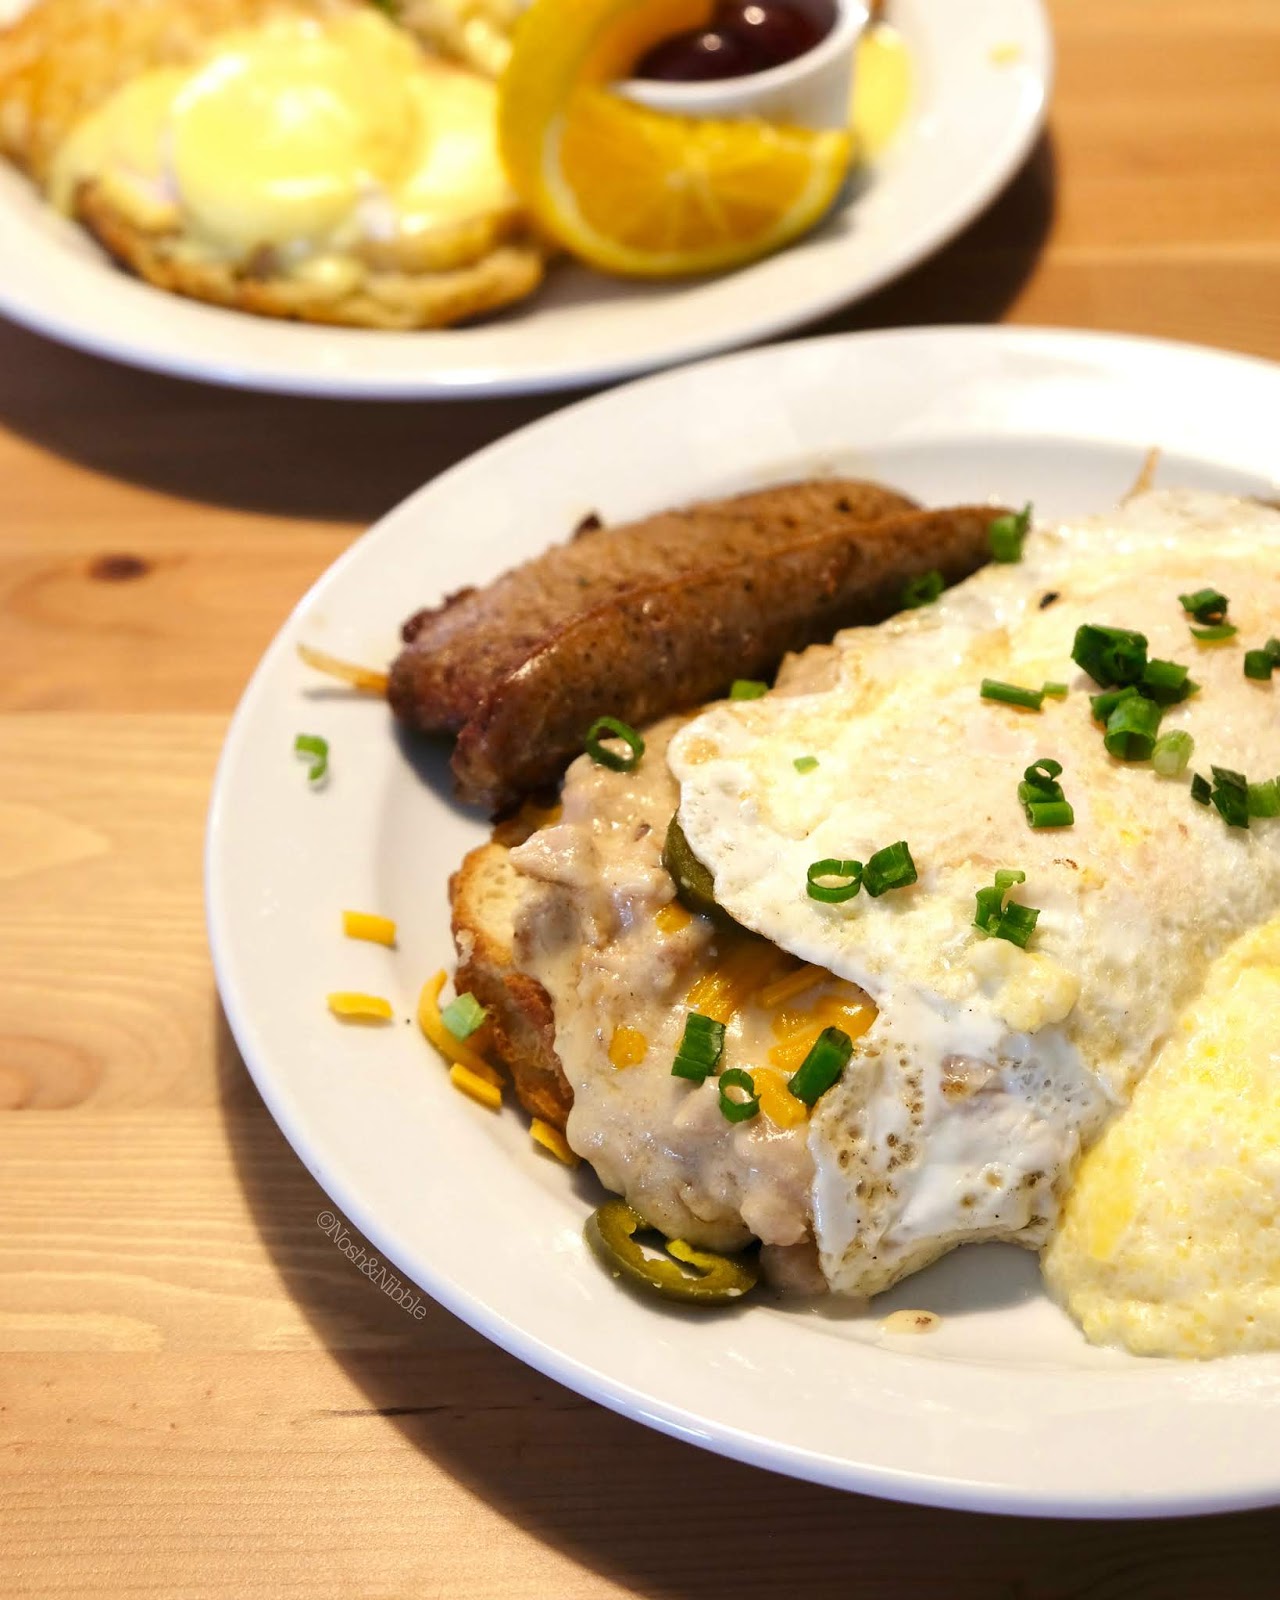 Shanzee's Biscuit Cafe in Victoria, BC | King of the Road Biscuits & Gravy: Review